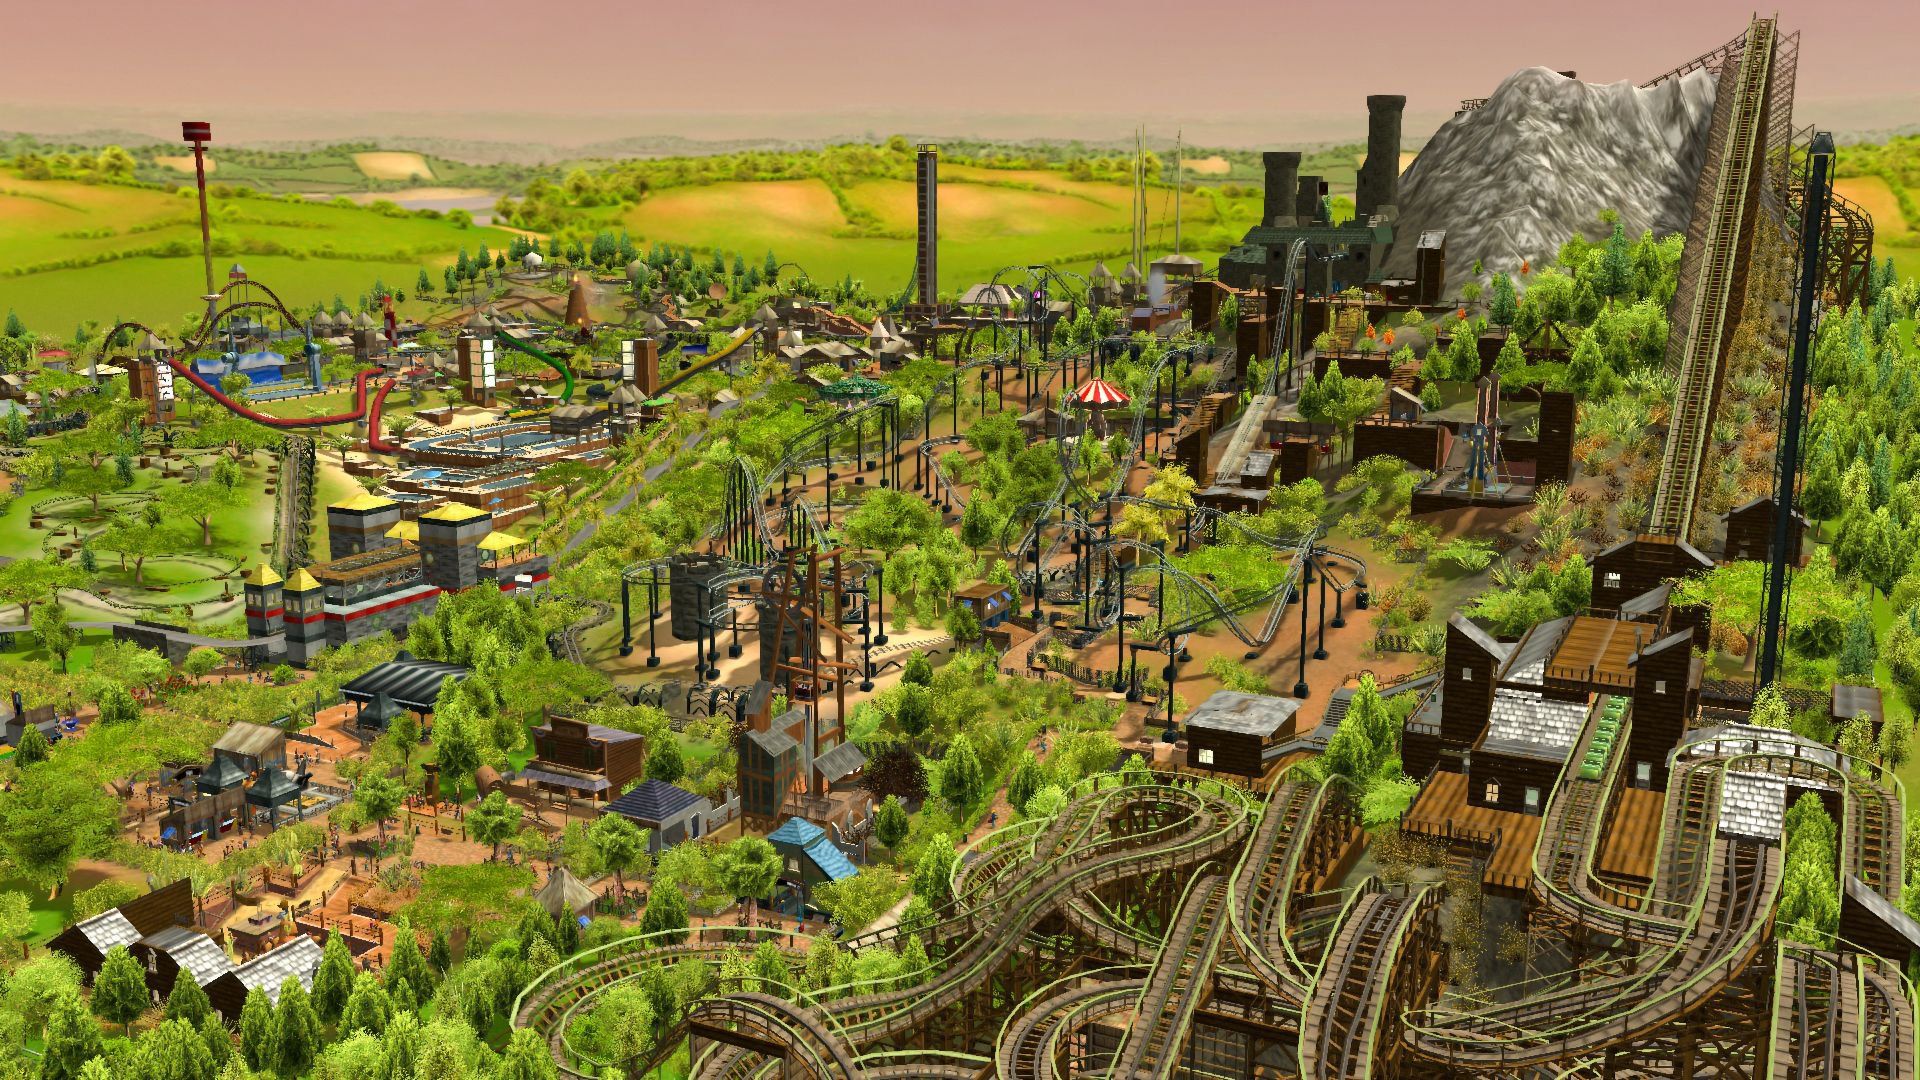 roller coaster tycoon 2 free torrent